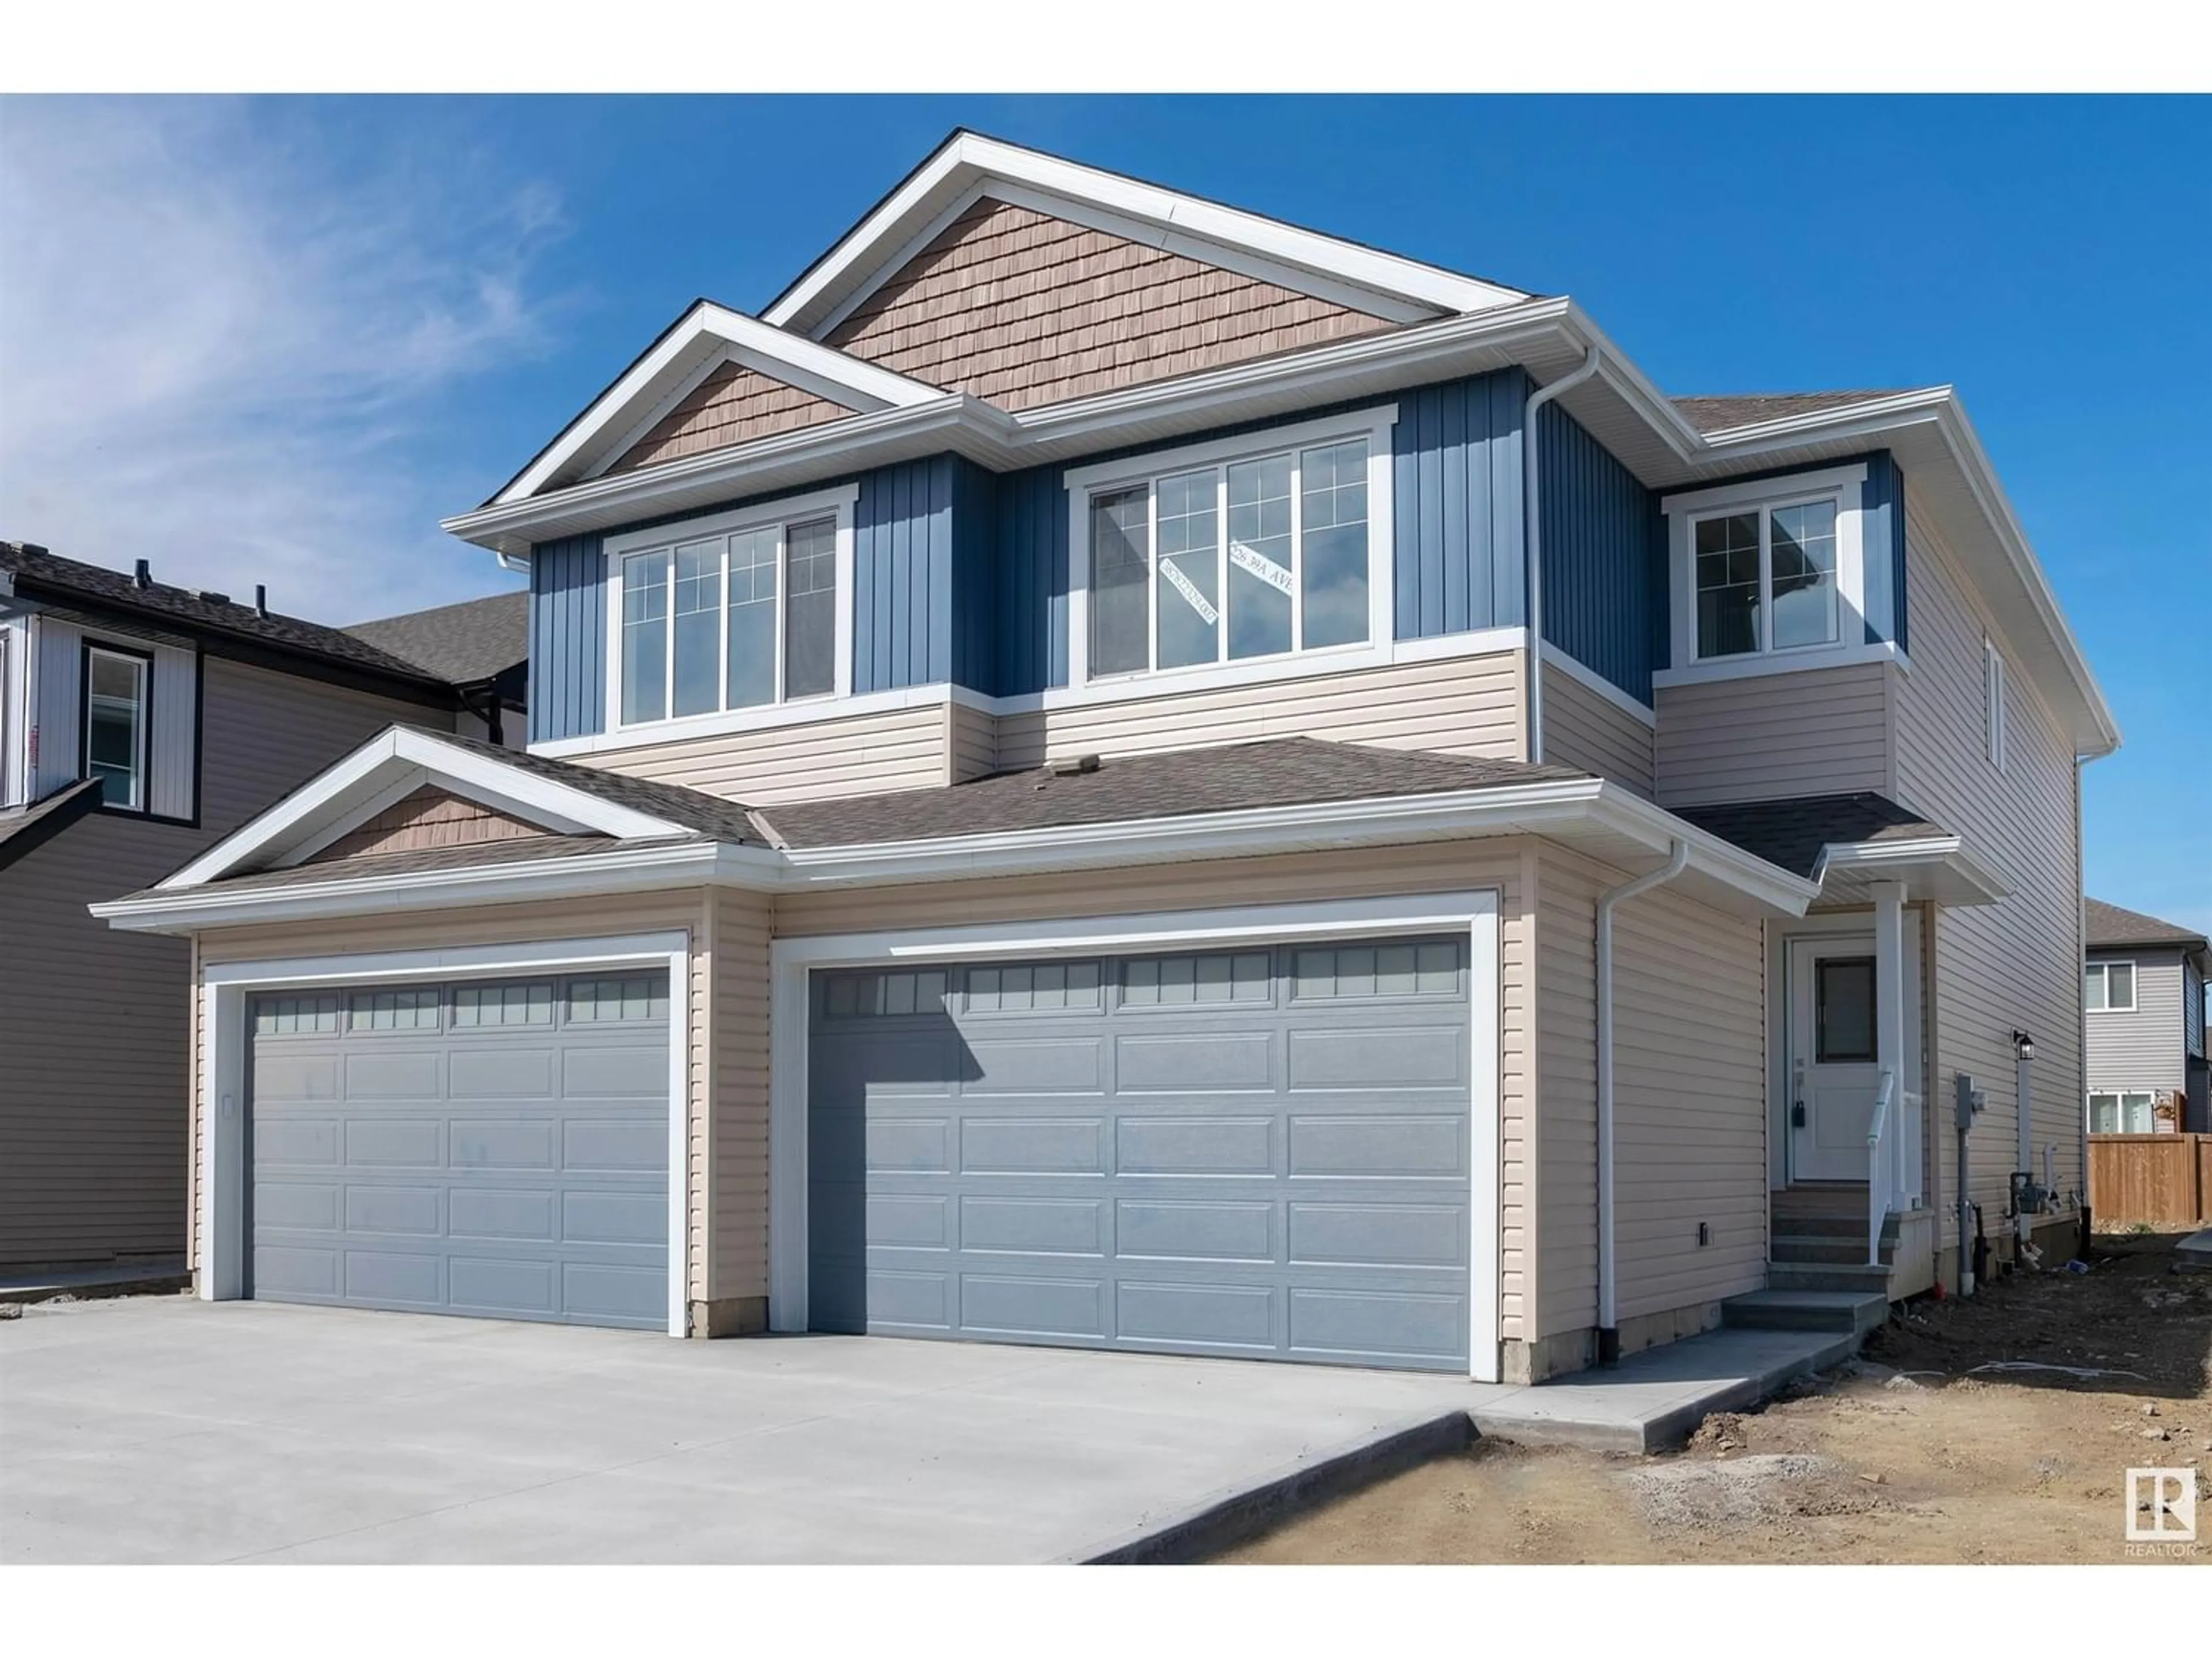 A pic from exterior of the house or condo for 320 32 AV NW, Edmonton Alberta T6T2K2